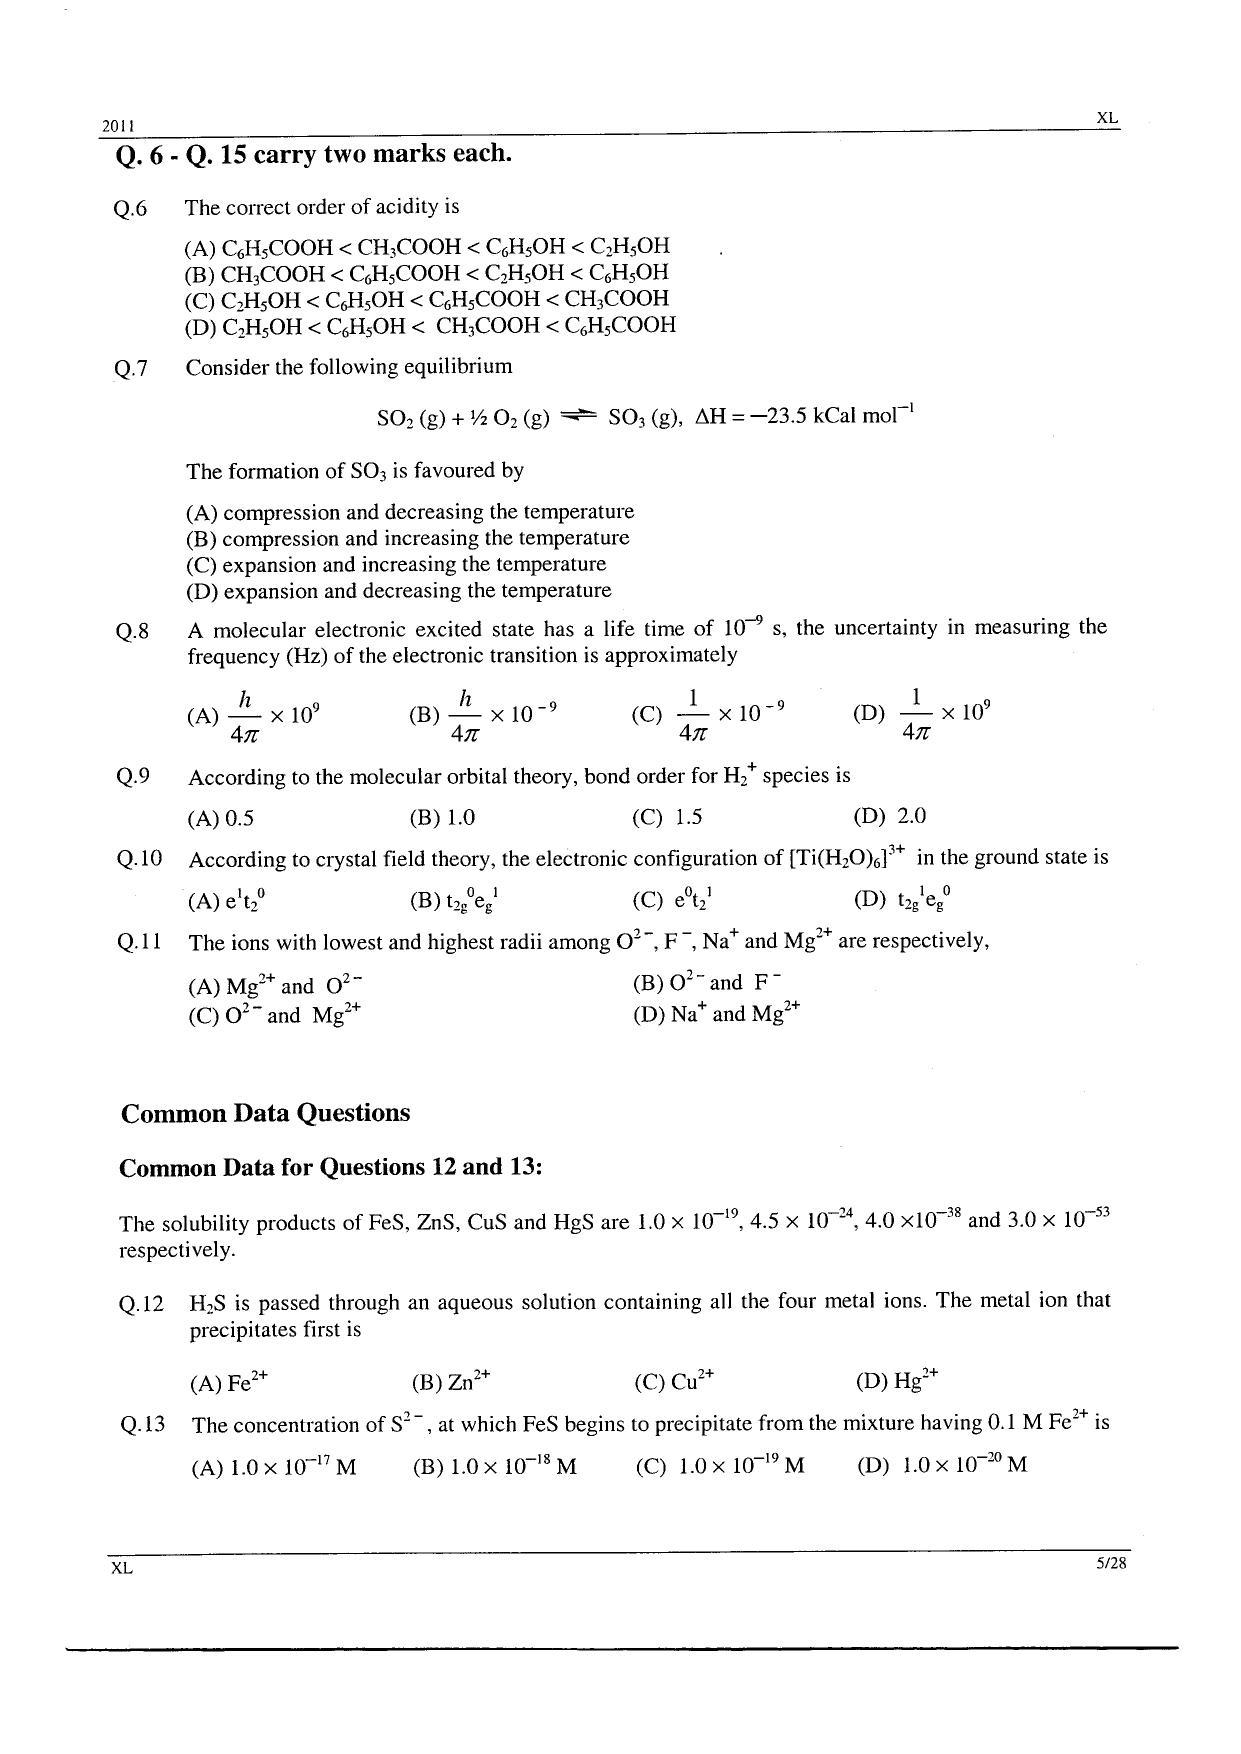 GATE 2011 Life Sciences (XL) Question Paper with Answer Key - Page 5